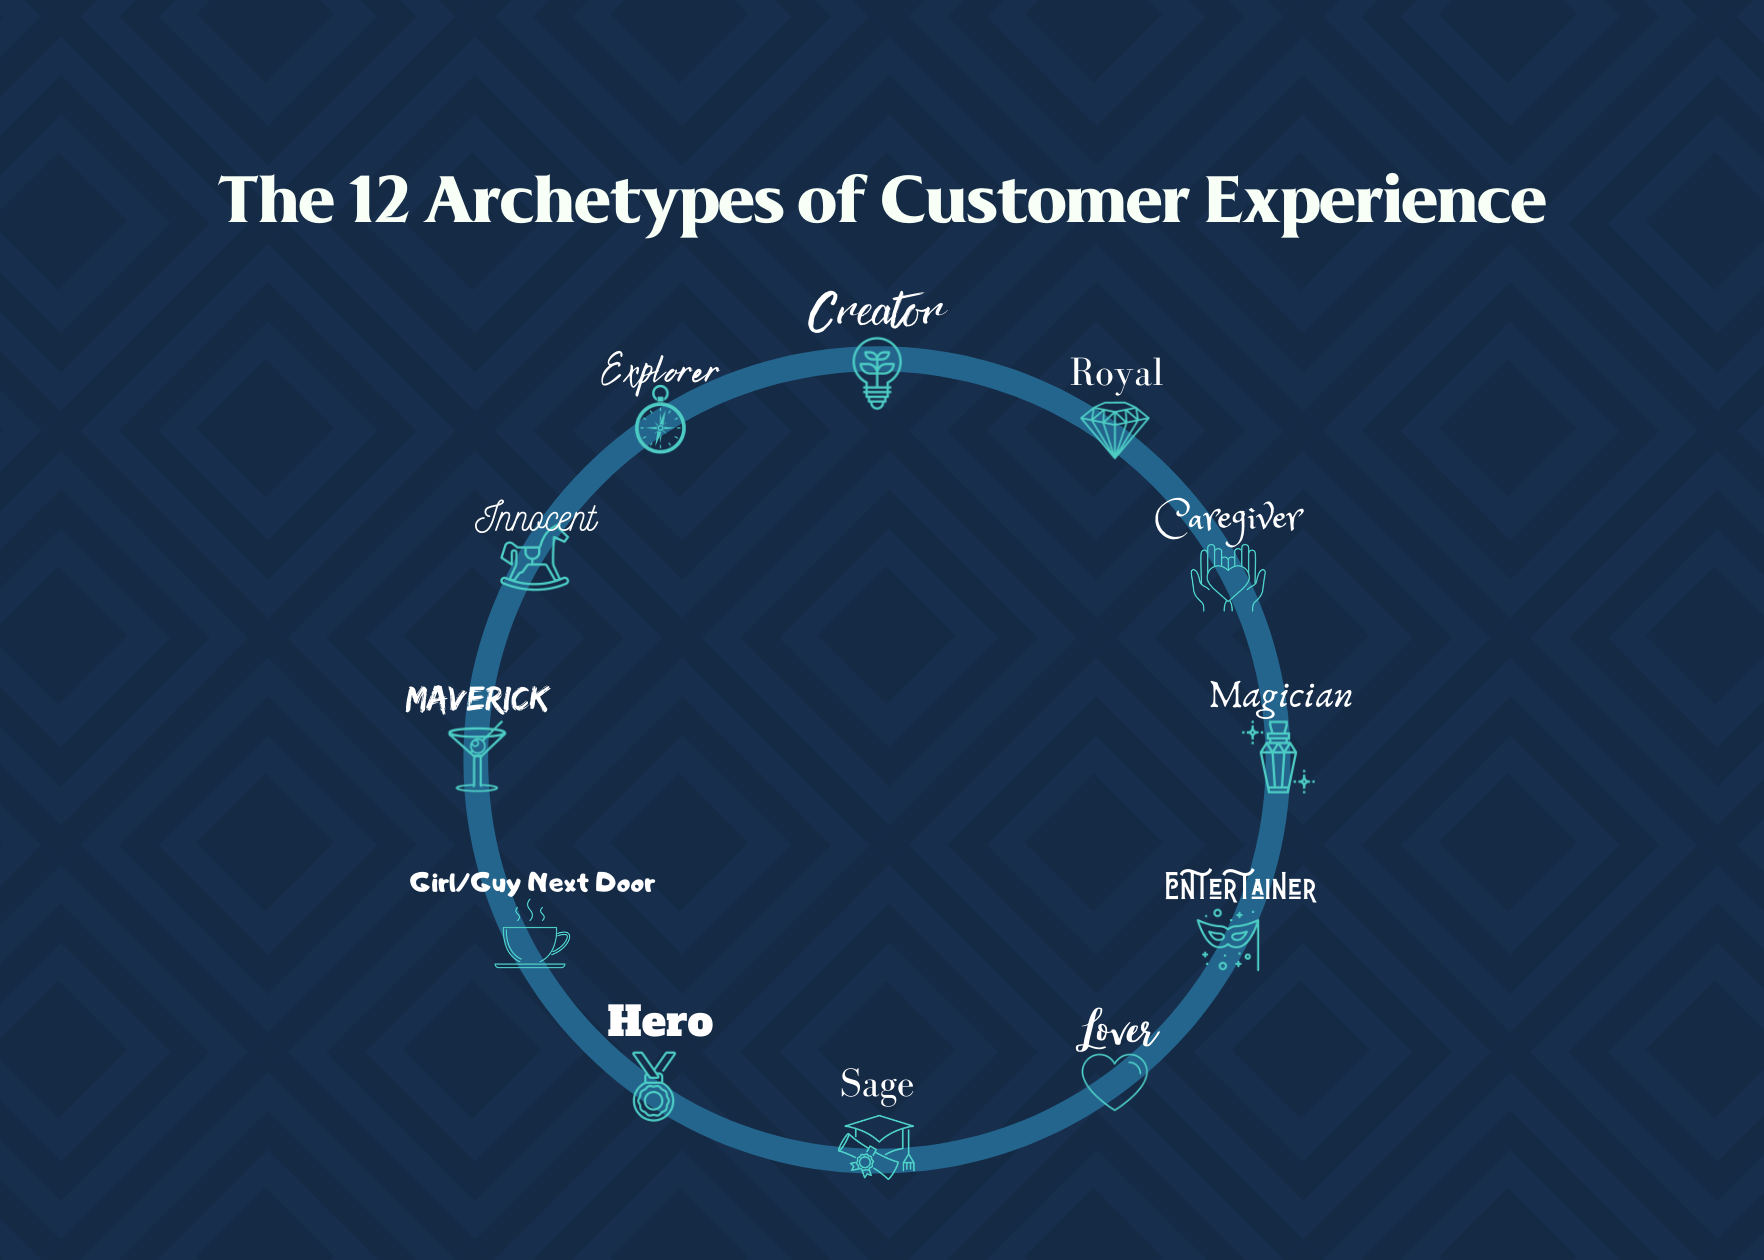 12 archetypes of customer experience; such as Creator, Hero